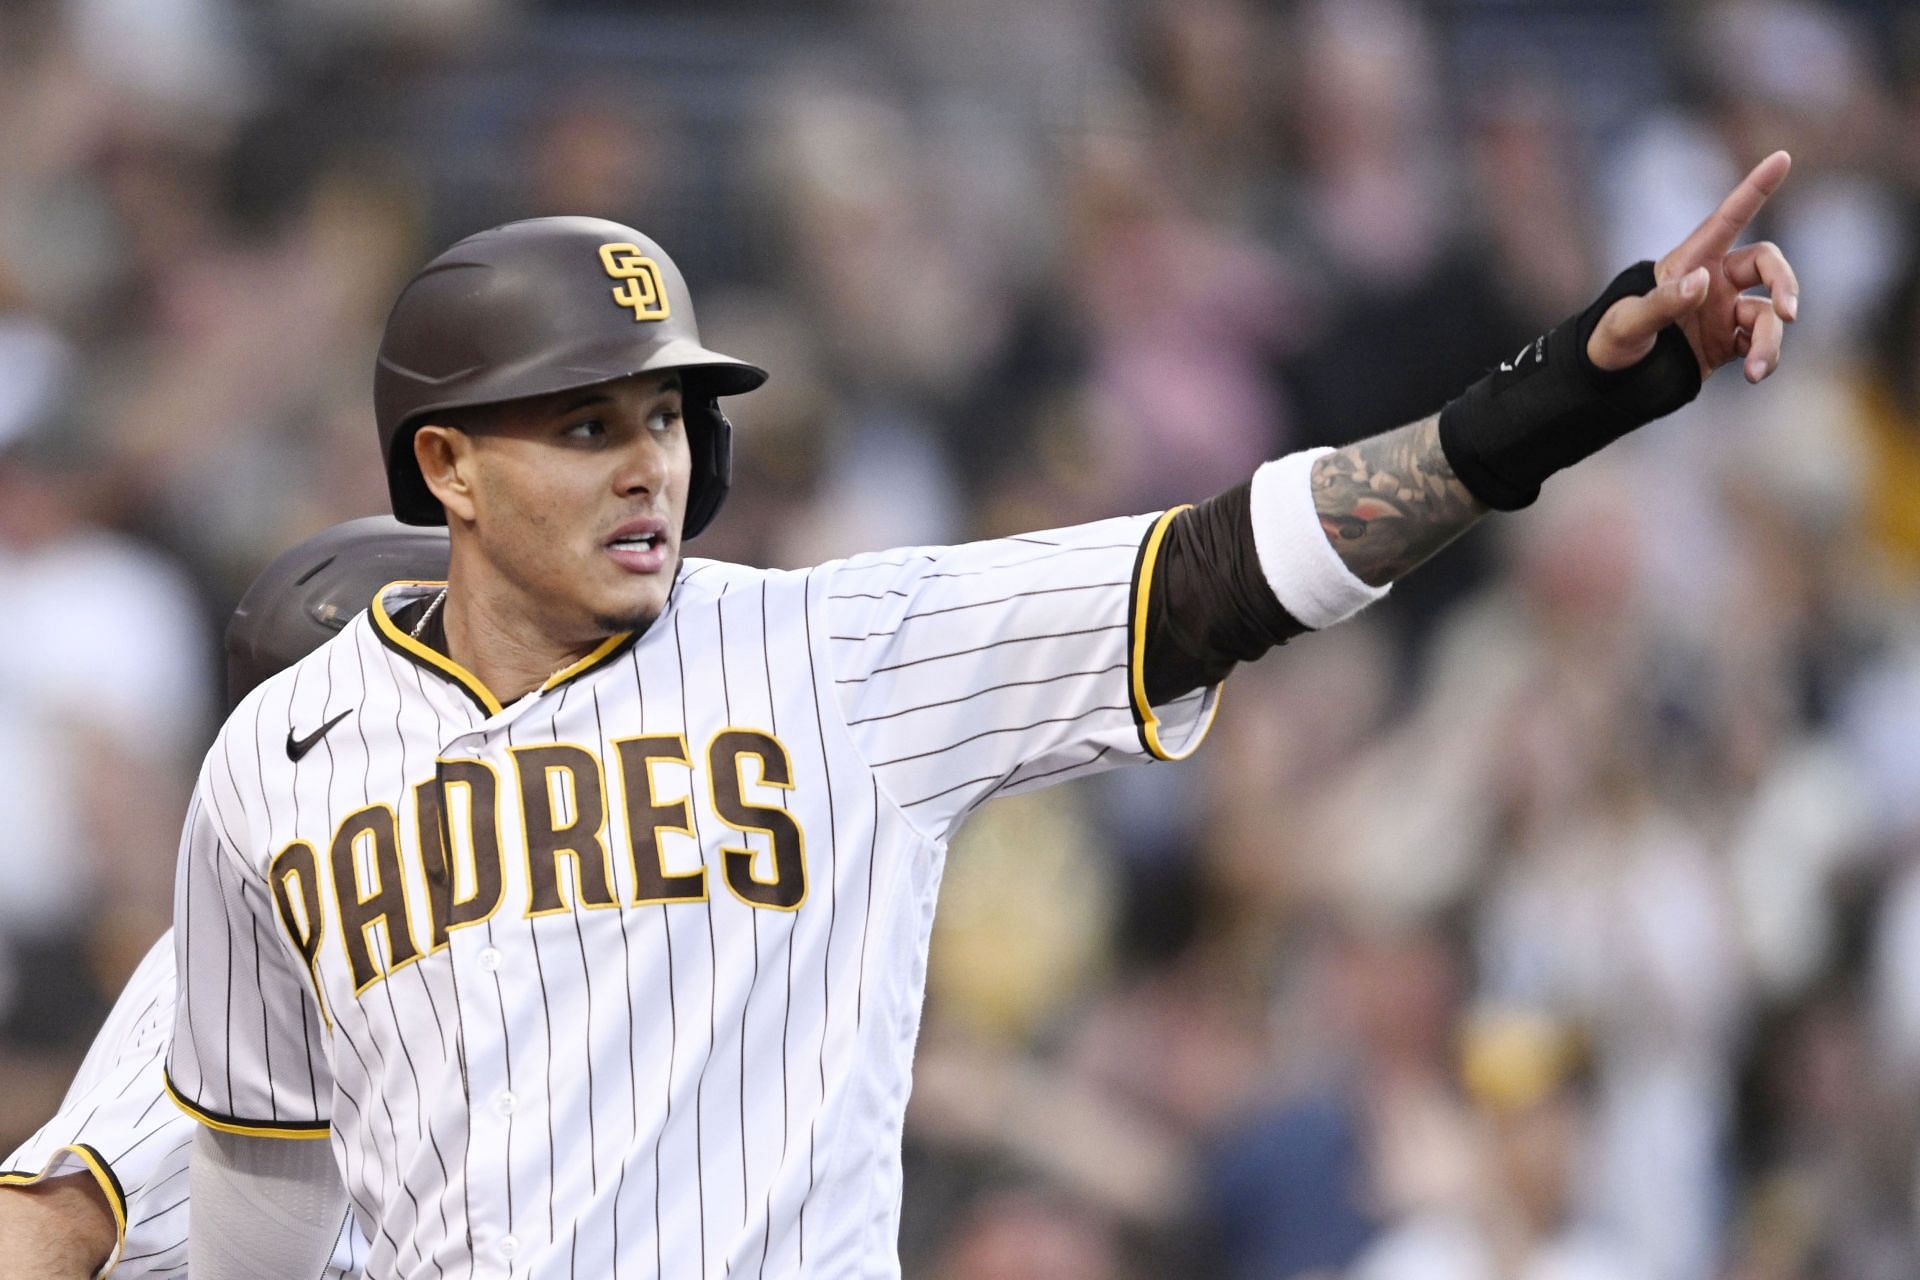 Manny Machado has been the main cog of the Padres offense.